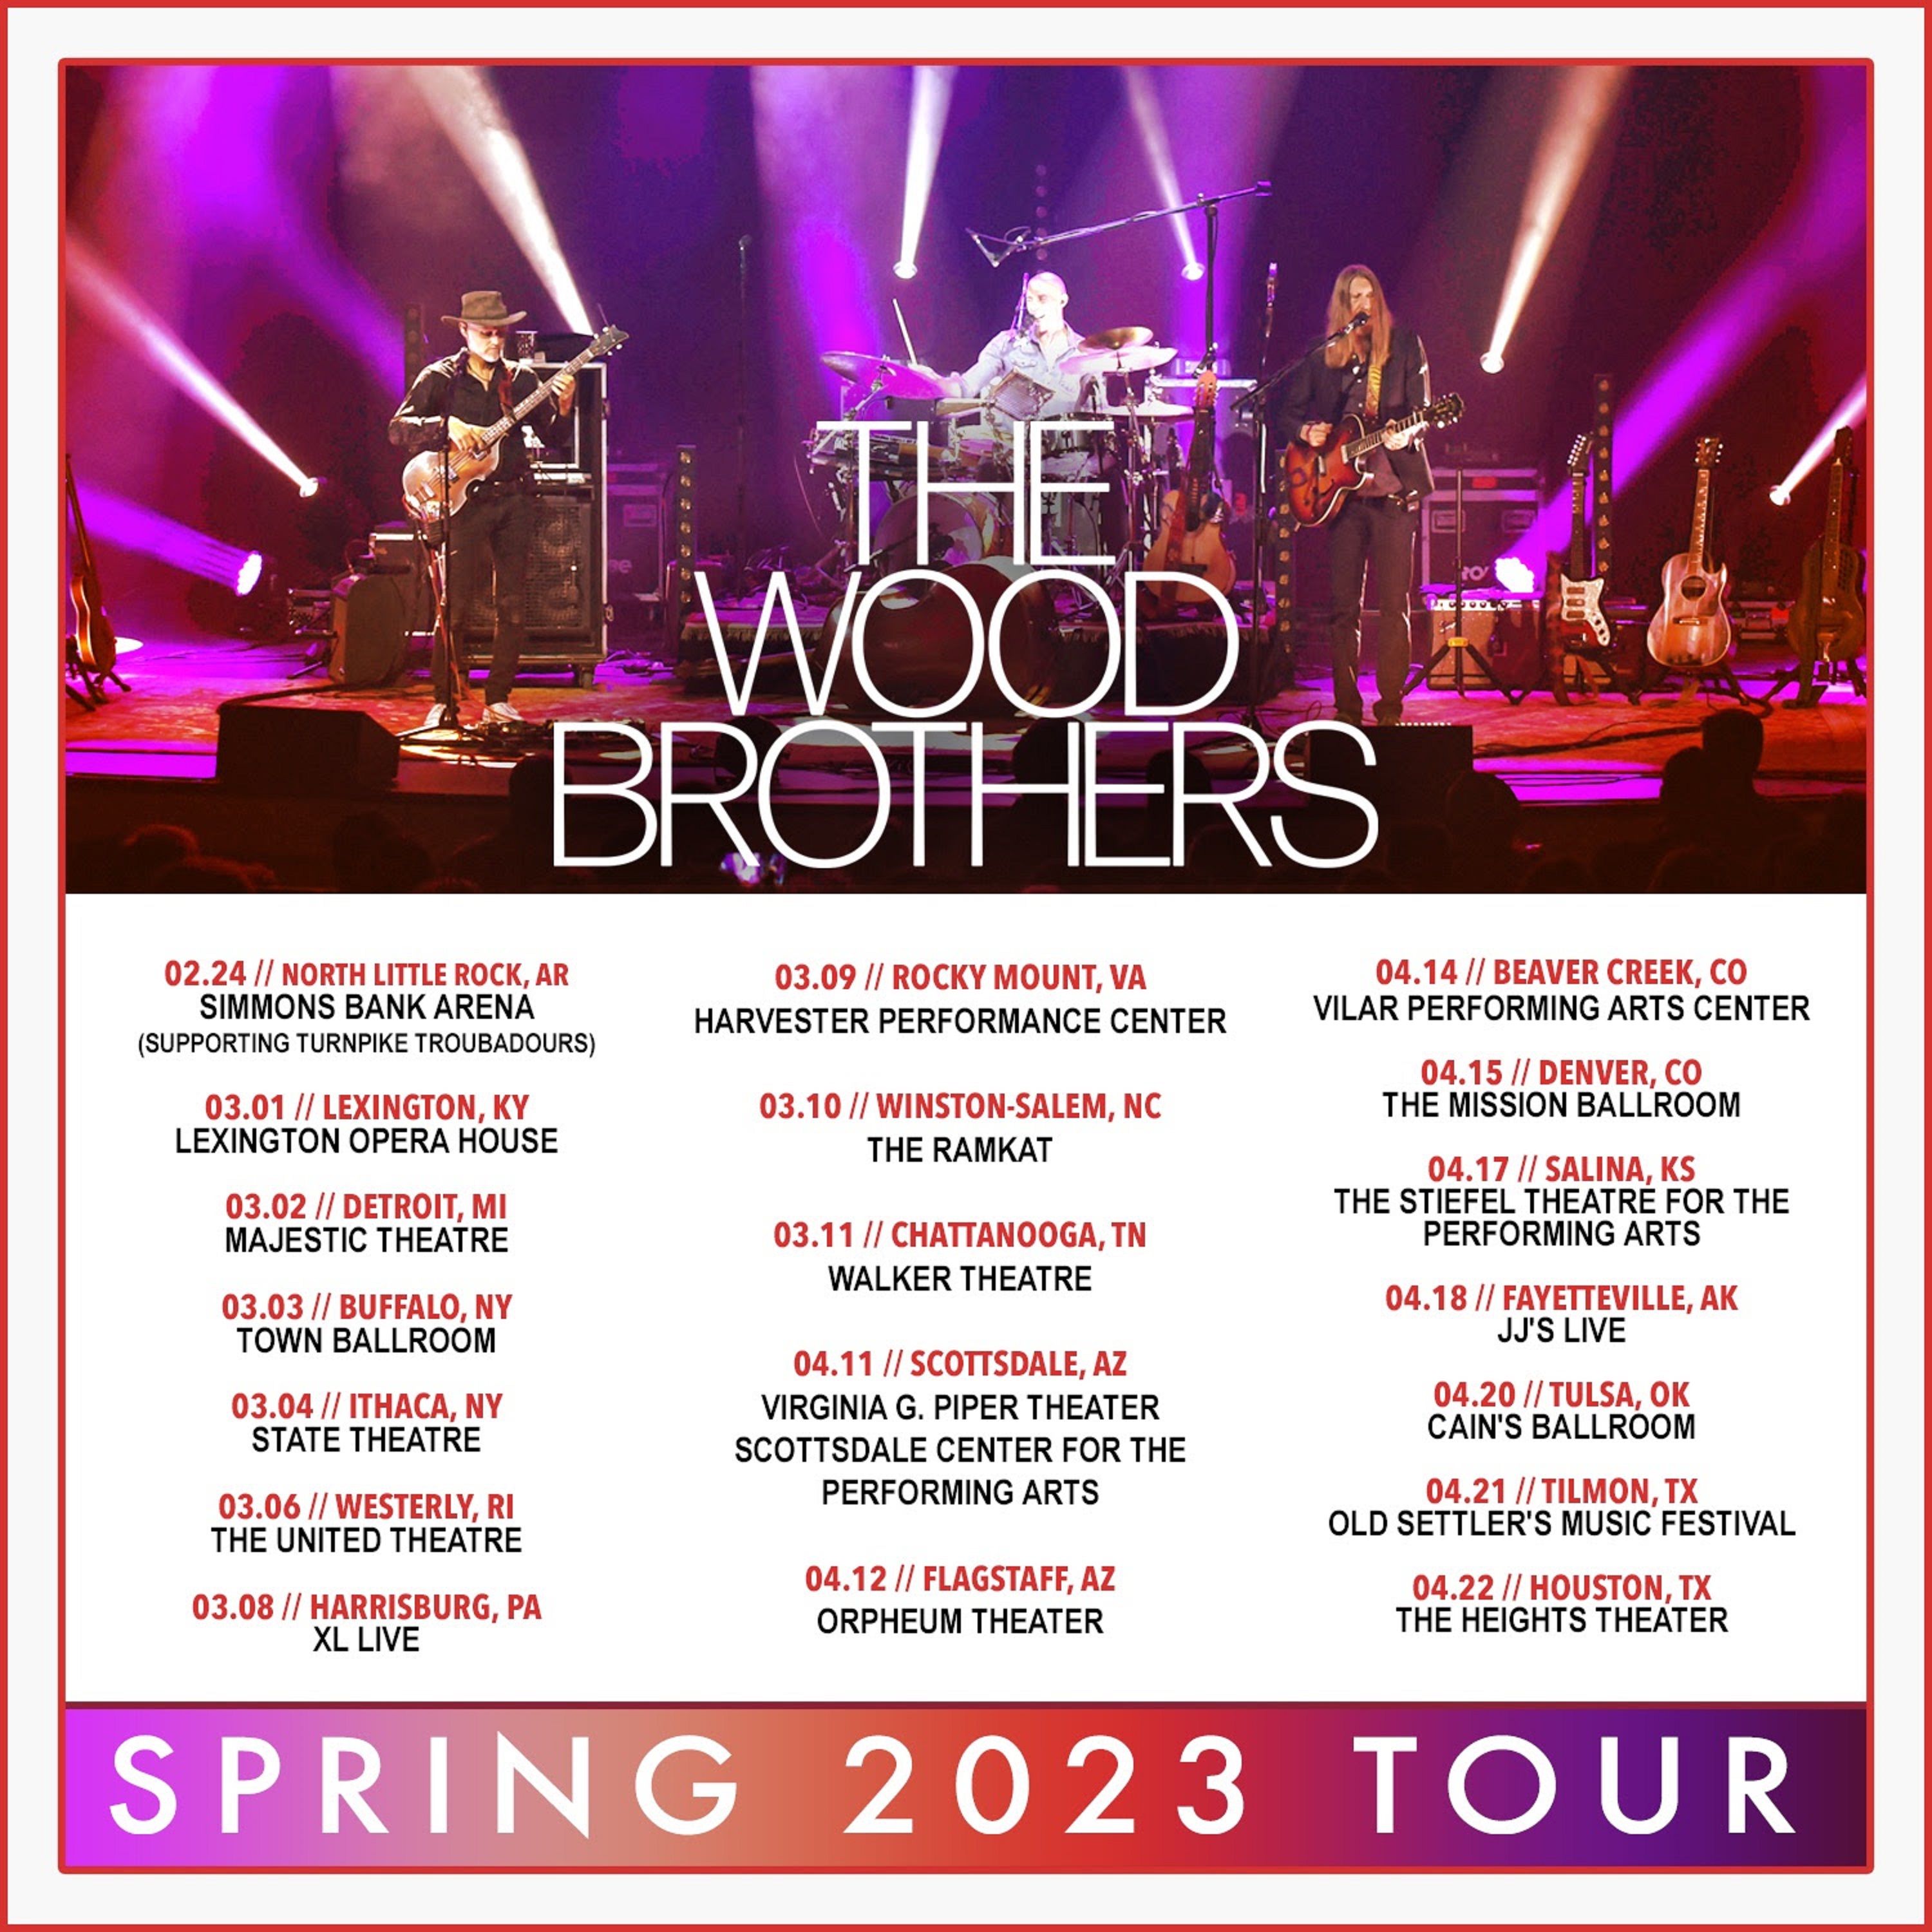 The Wood Brothers Announce Spring 2023 Tour Dates / 'Heart Is The Hero' Revealed As Title Of Next Studio Album